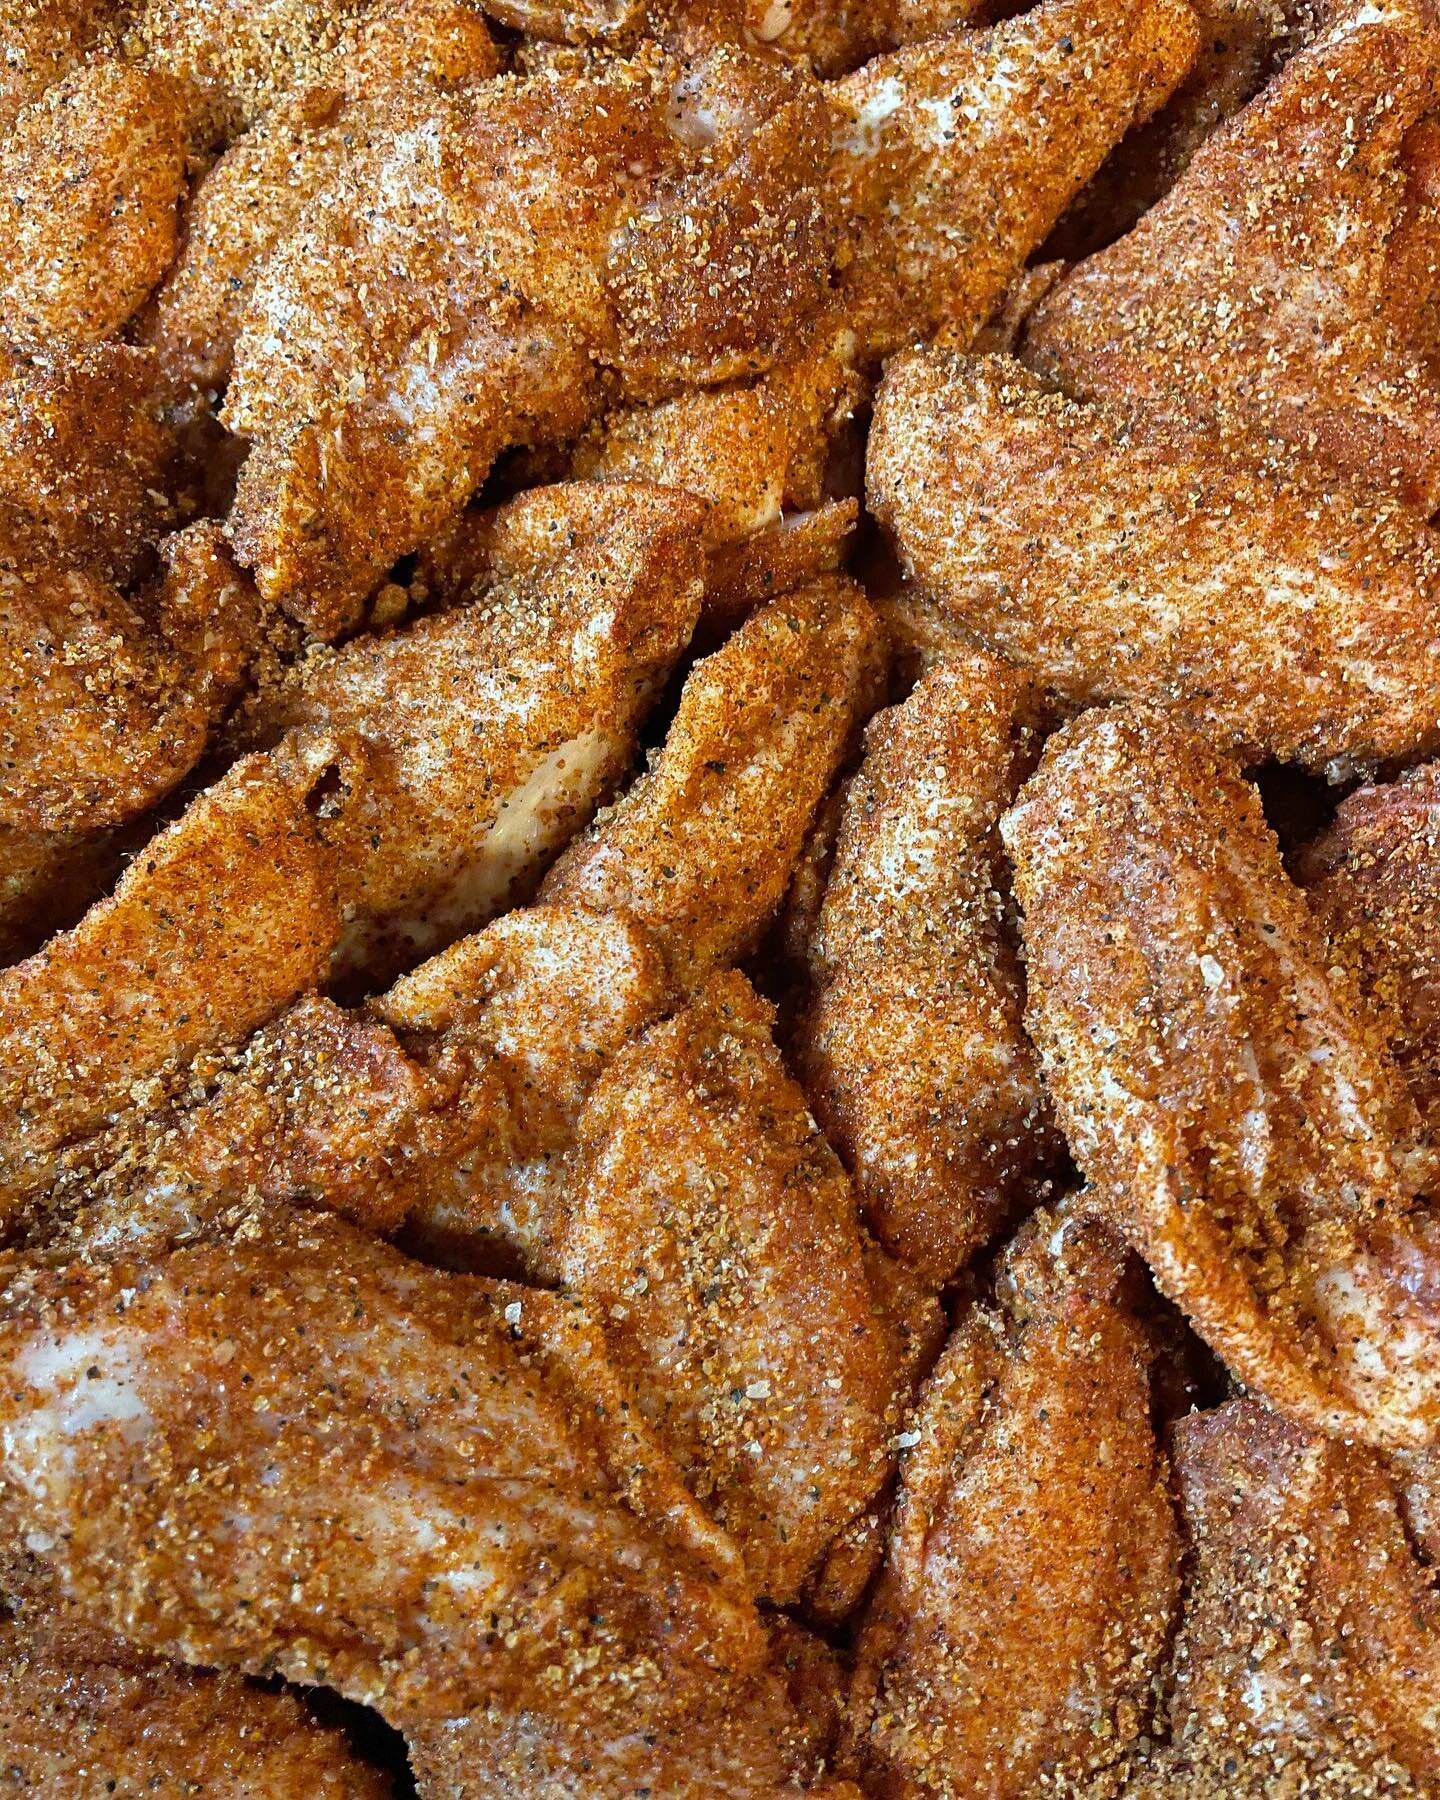 We think Wednesdays are for wings. What do you think? 

Smoked and dry-rubbed&hellip;. Ready to be fried!